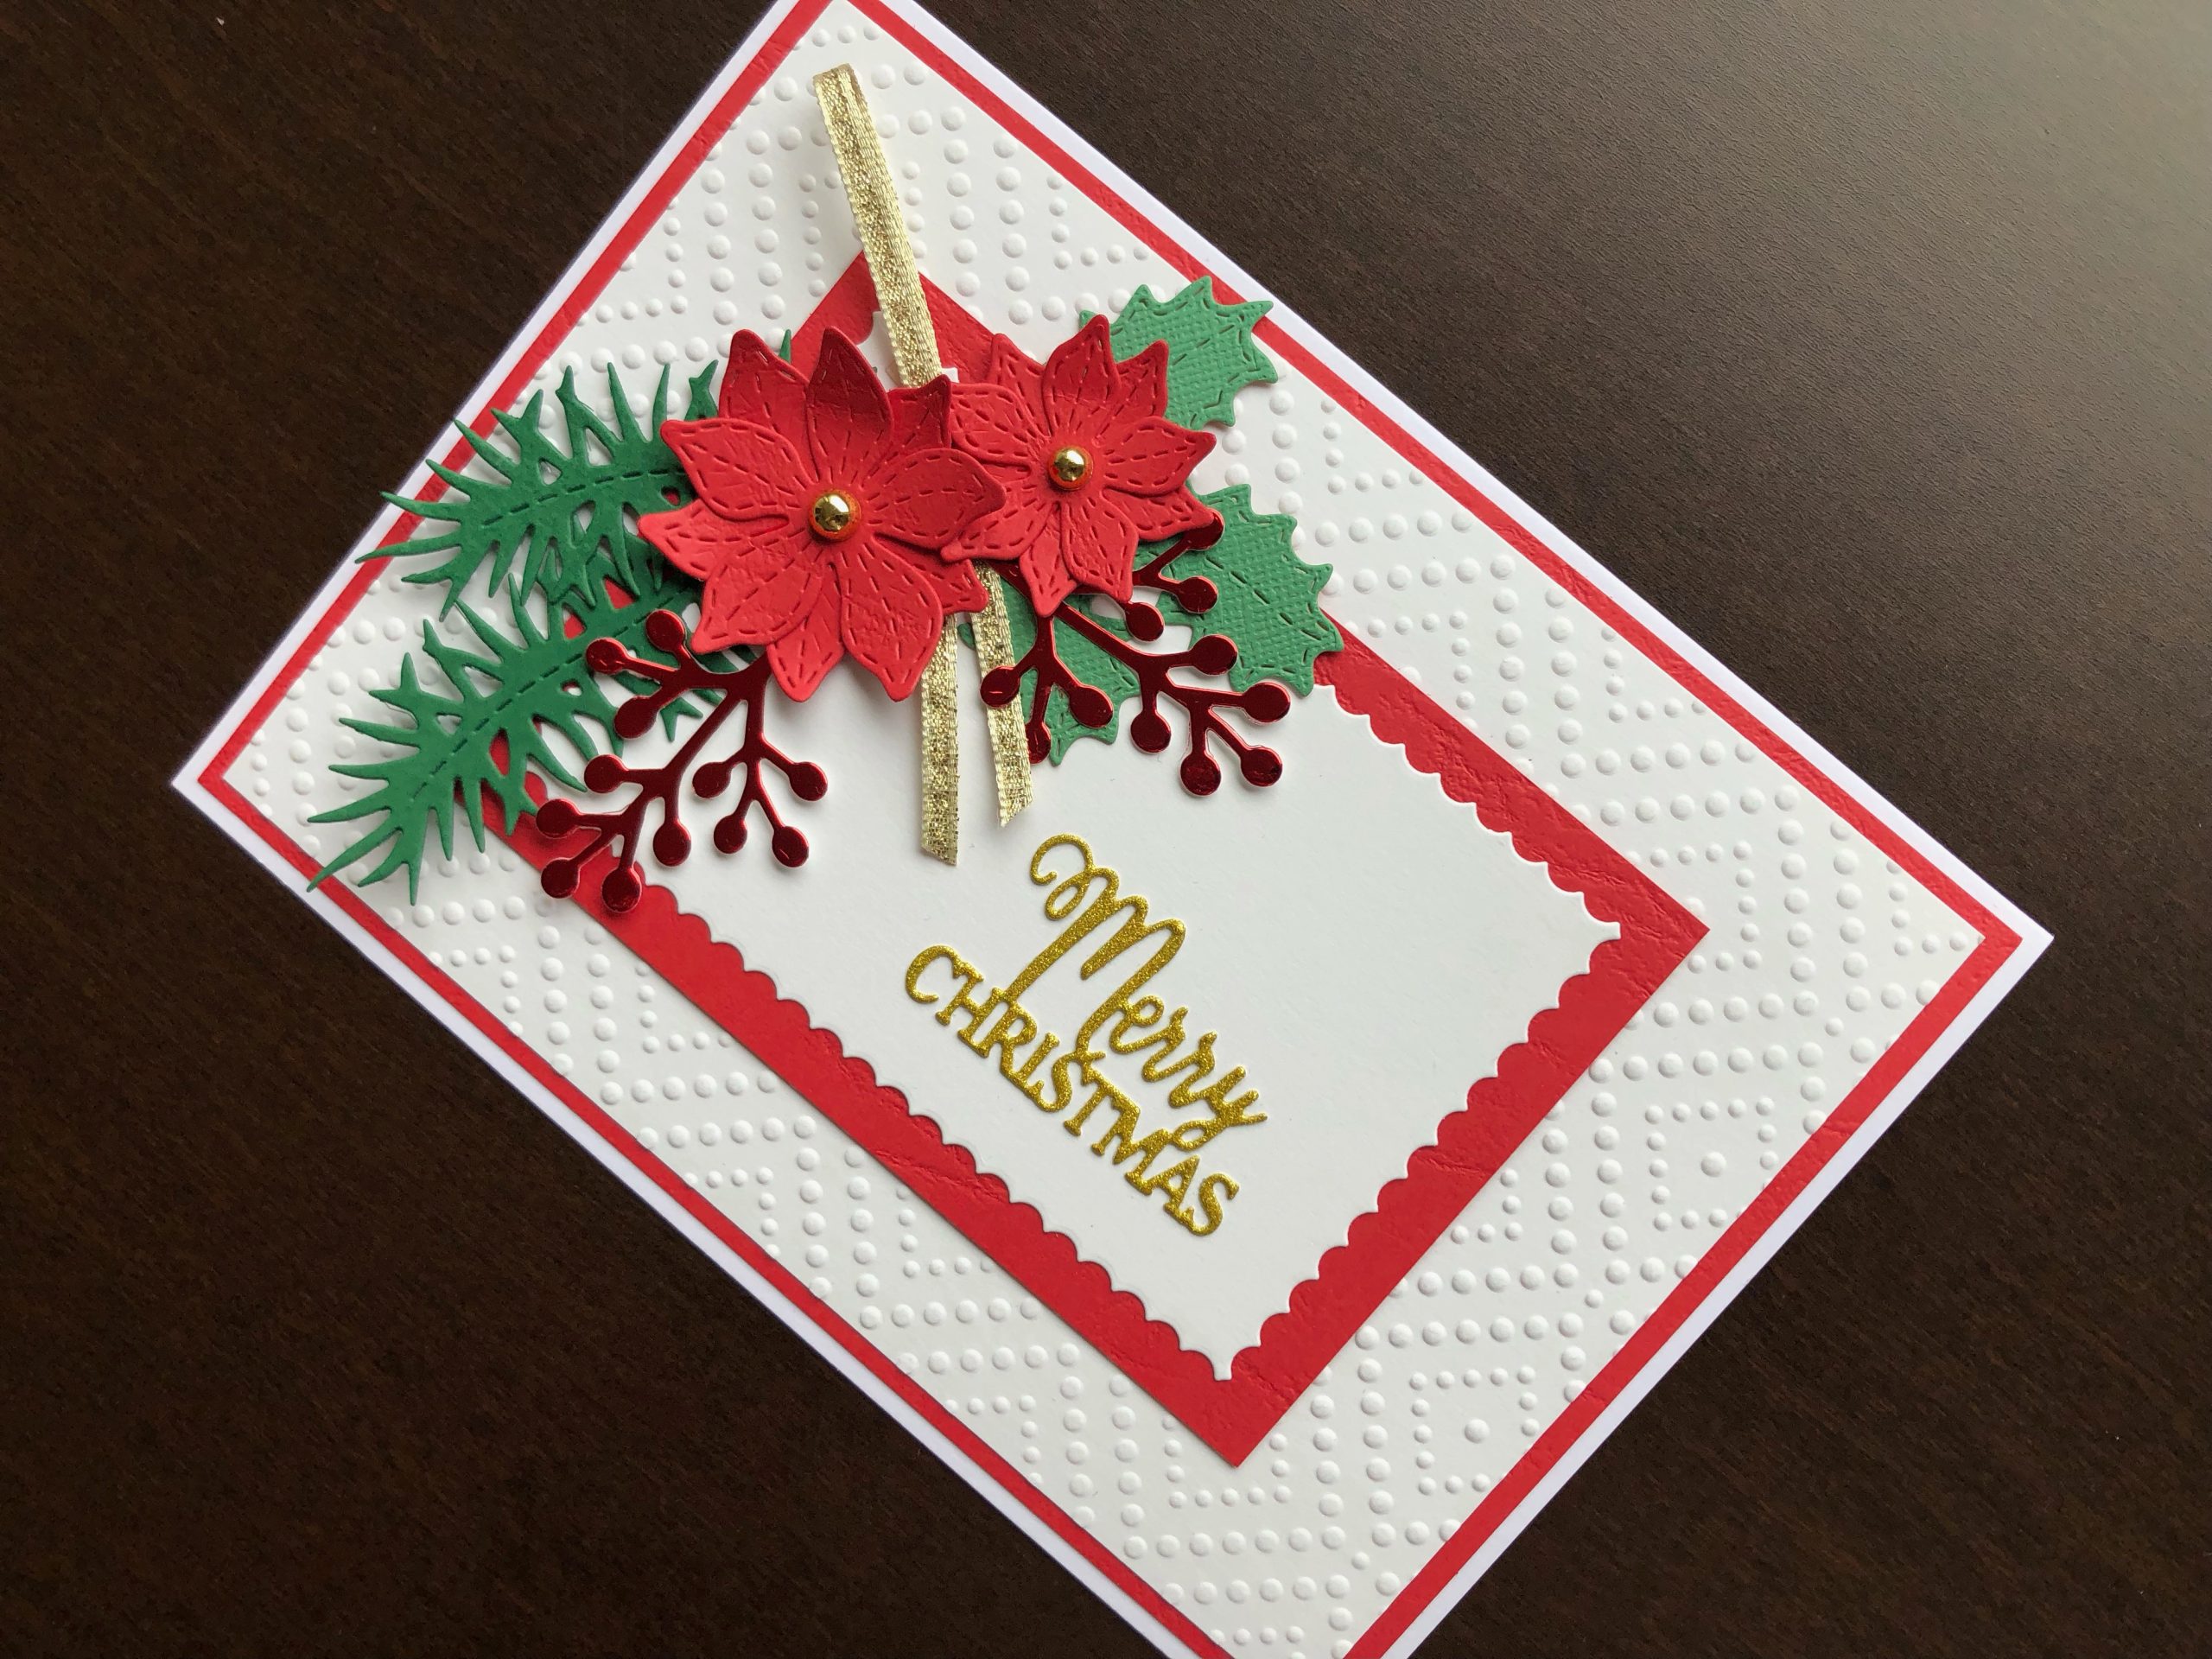 Hand made Christmas card with die cut poinsettias, winter foliage and sentiment